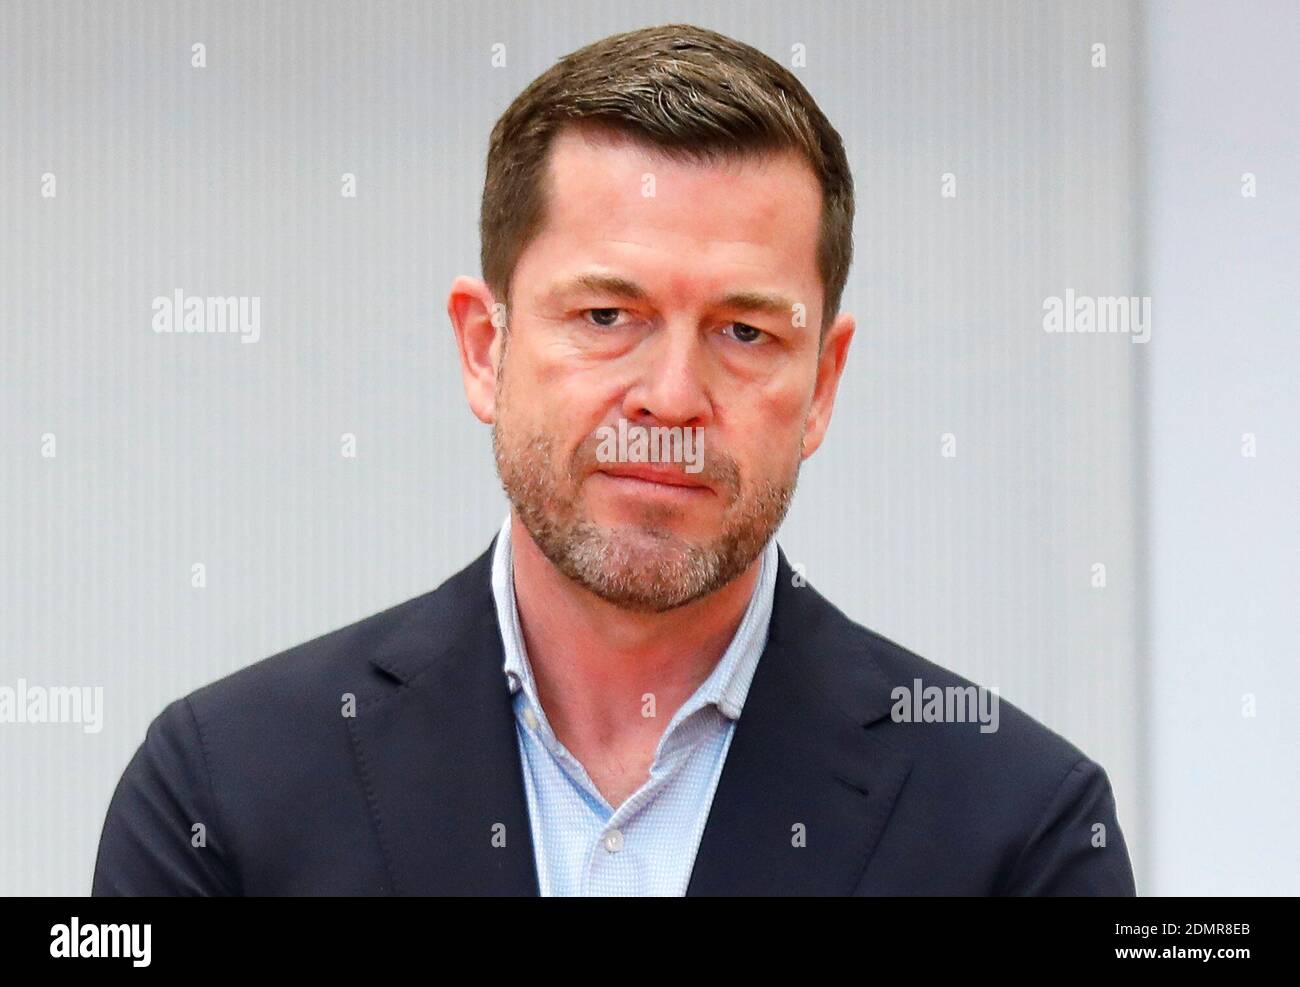 Berlin, Germany. 17th Dec, 2020. Former defence minister Karl-Theodor zu Guttenberg is standing behind his chair ahead of a meeting of the Bundestag's Wirecard investigation committee. He is to be questioned about a trip to China during which Chancellor Merkel (CDU) lobbied for the German fin-tech before the accounting scandal at Wirecard was exposed in 2019. Guttenberg was advising Wirecard at the time and initiated contact with the chancellor's office. Credit: Michele Tantussi/Reuters/Pool/dpa/Alamy Live News Stock Photo